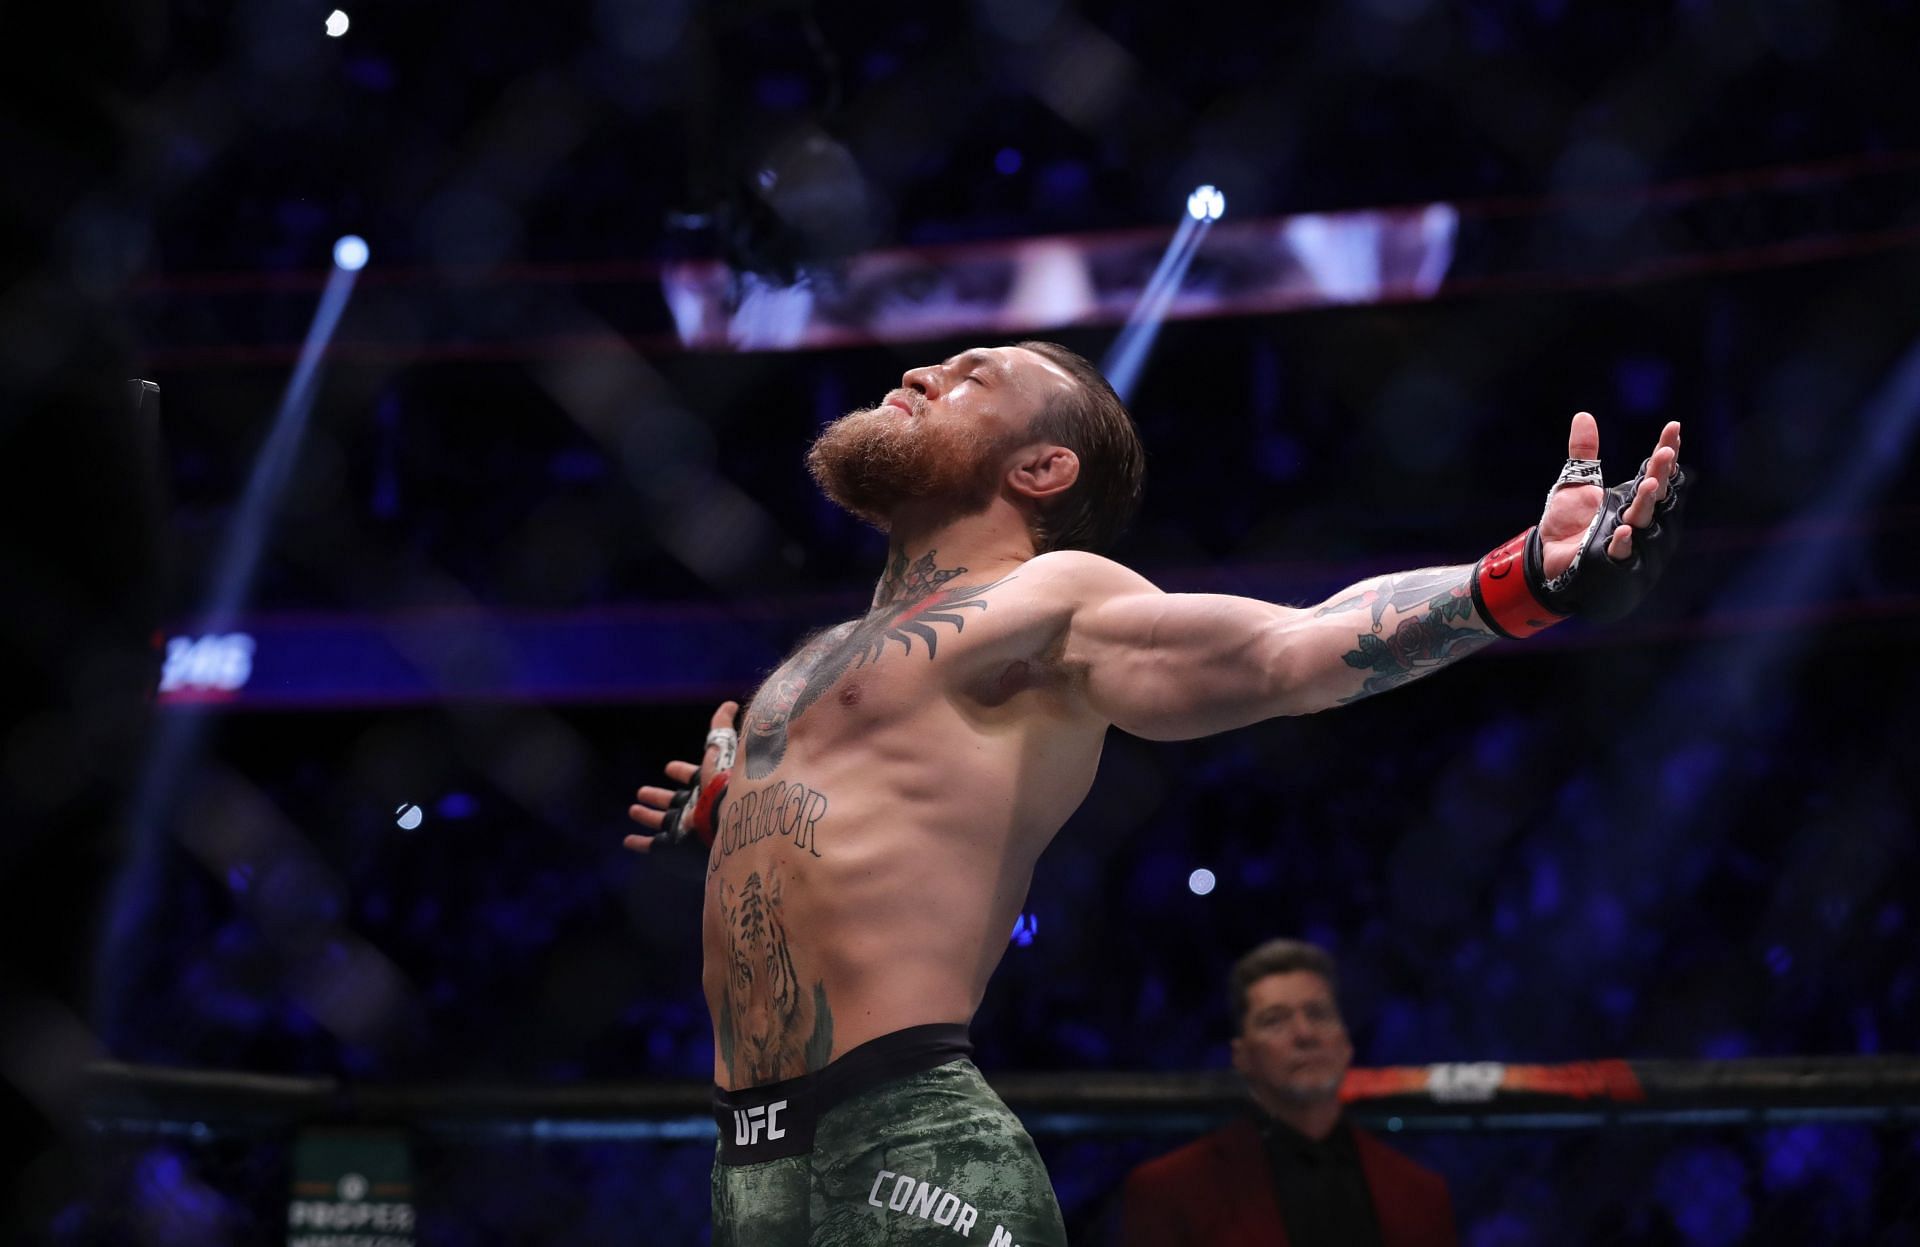 A fight with Jorge Masvidal could be presented to Conor McGregor instead of a lightweight title shot